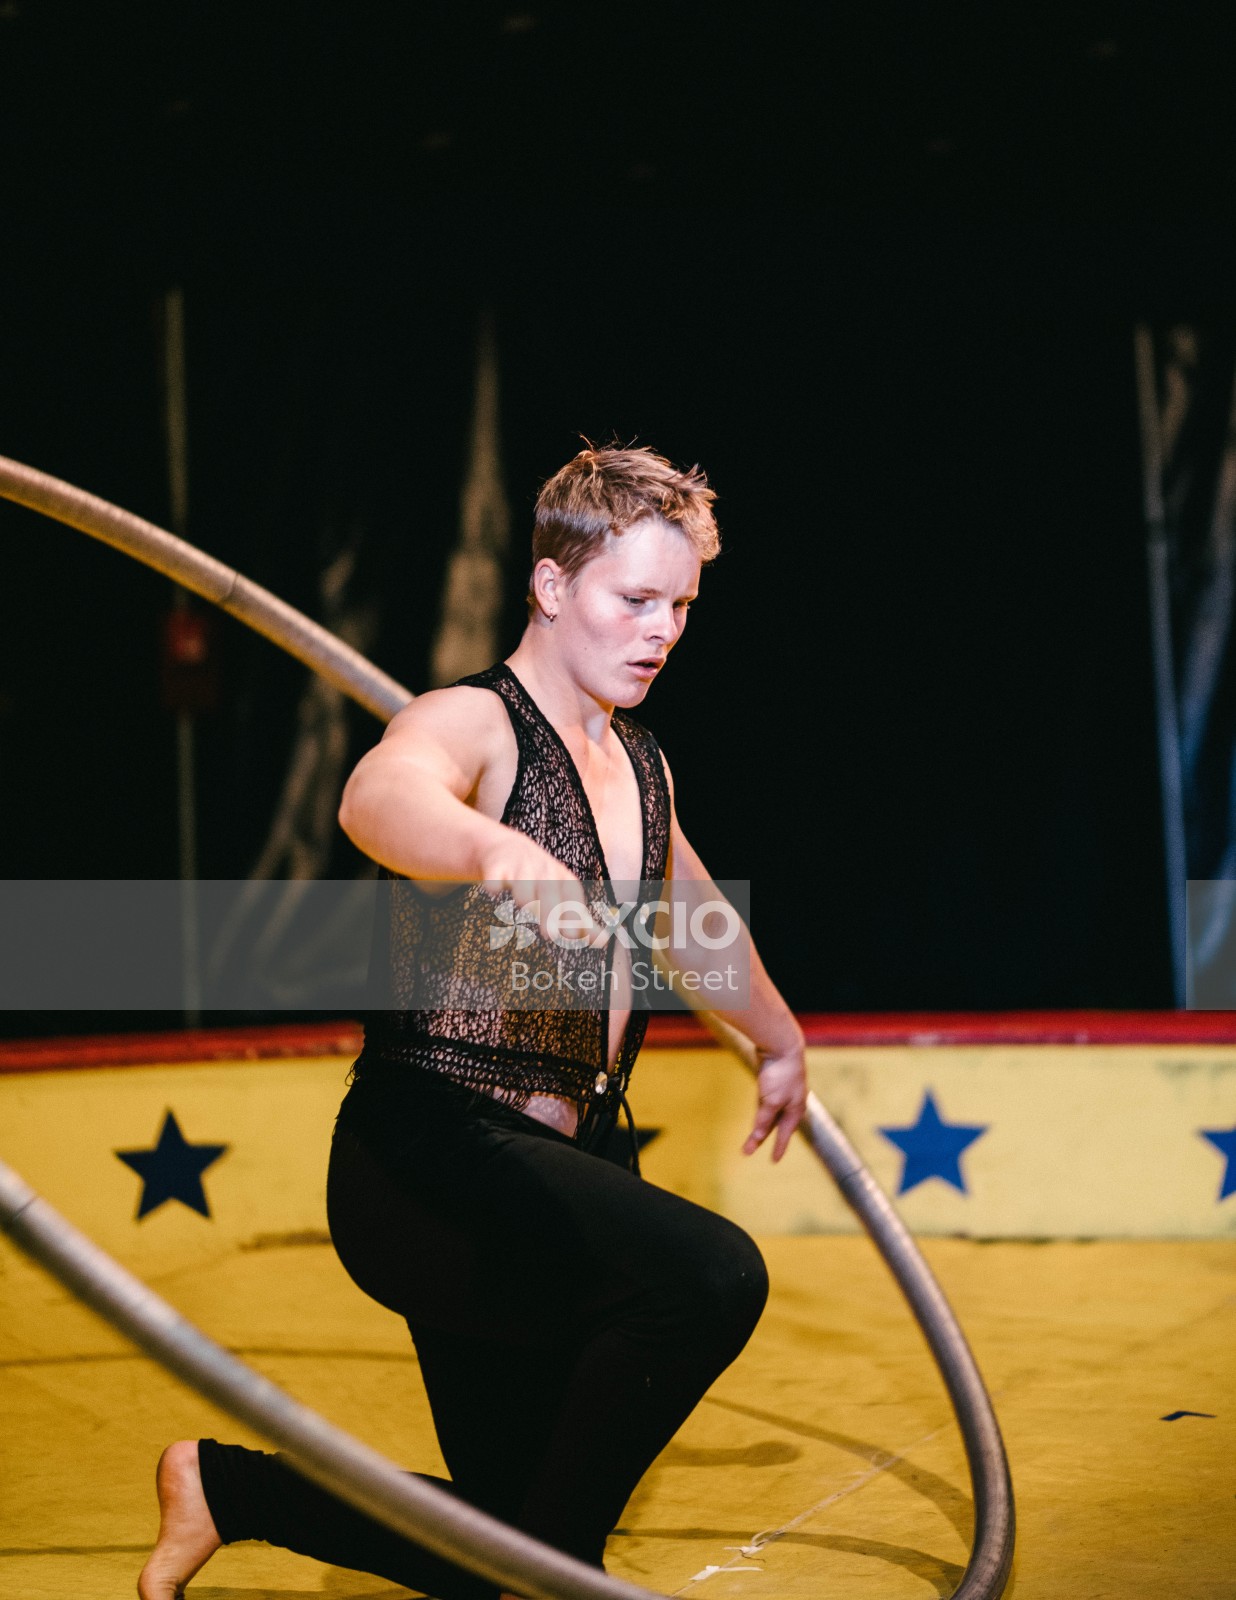 Acrobat at a circus performing with ring